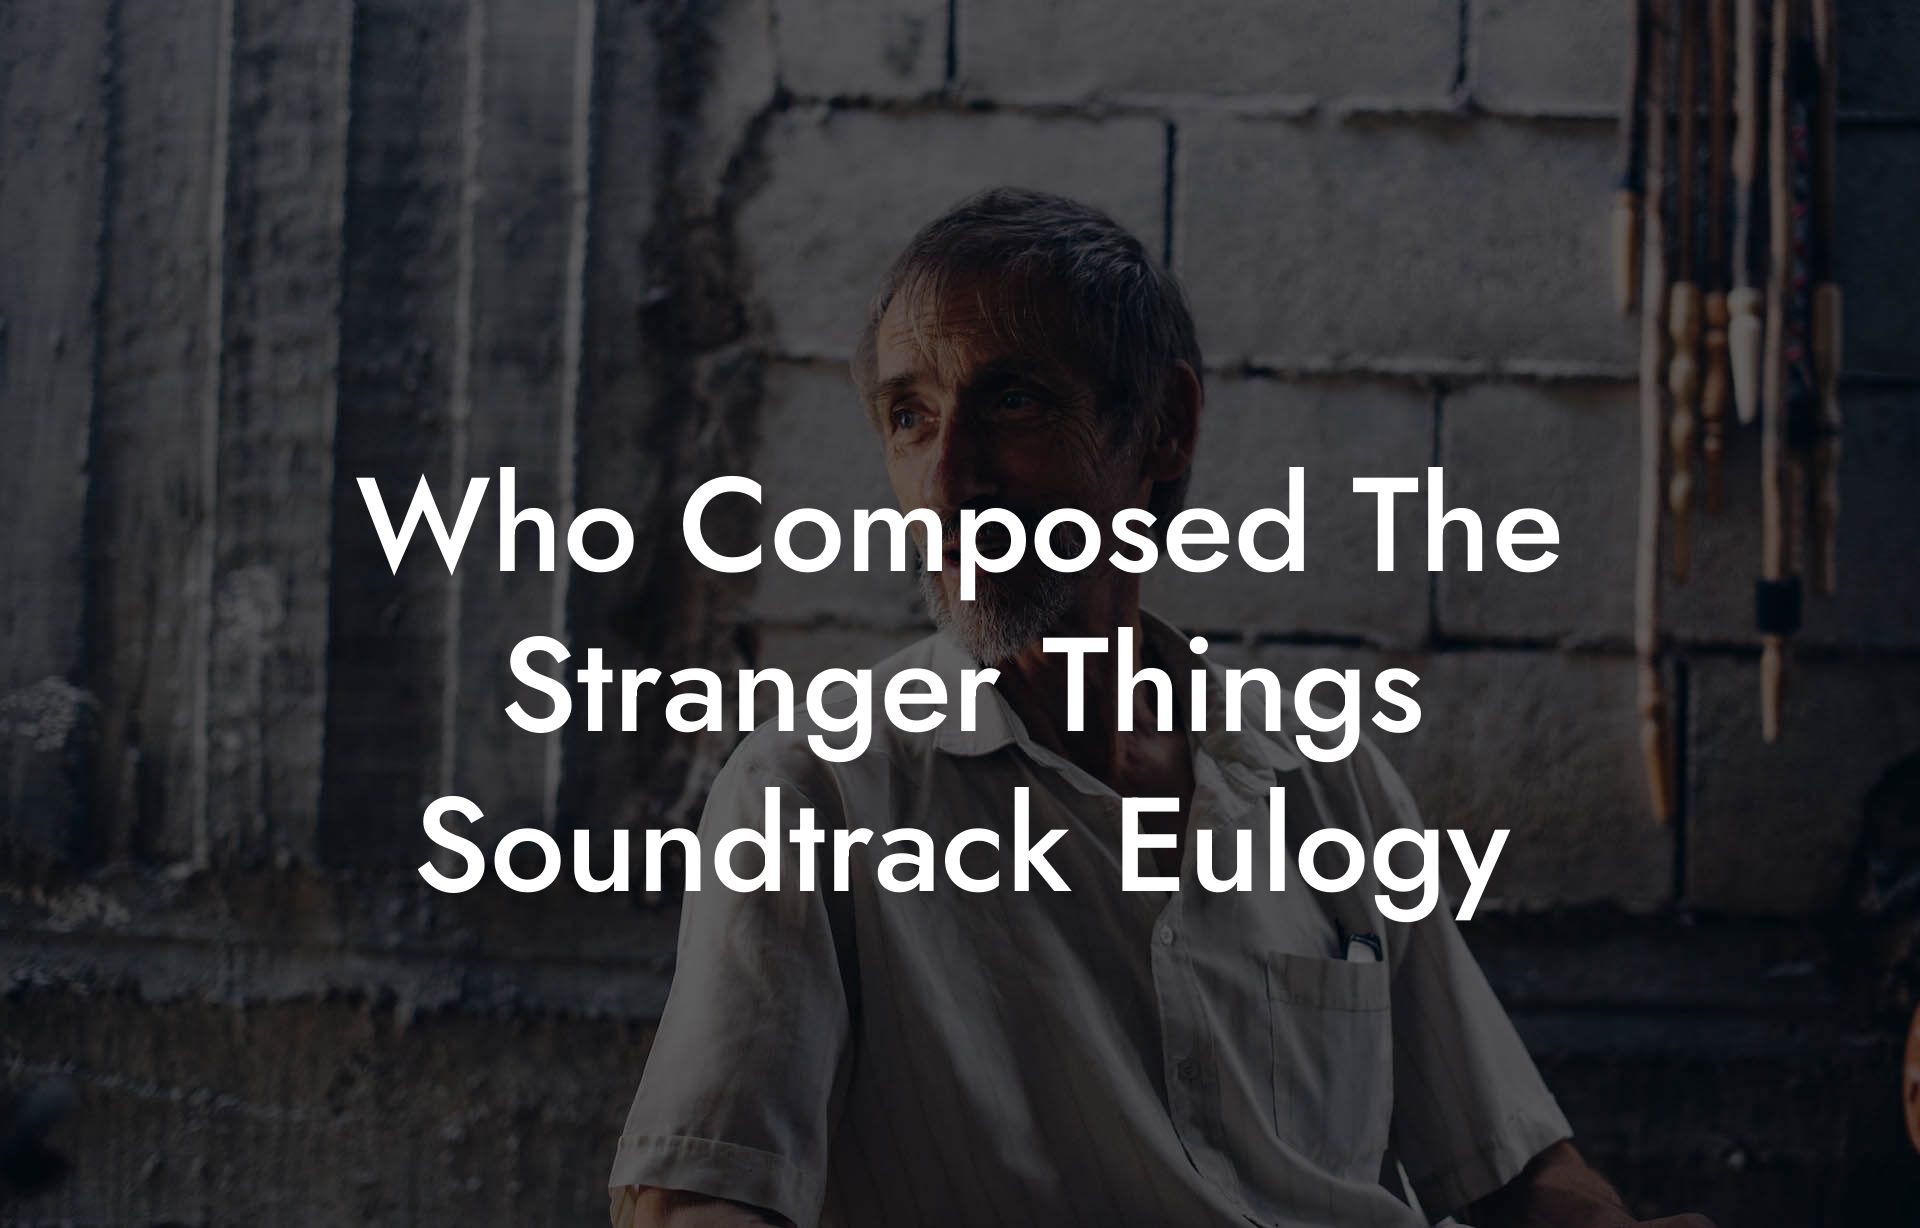 Who Composed The Stranger Things Soundtrack Eulogy